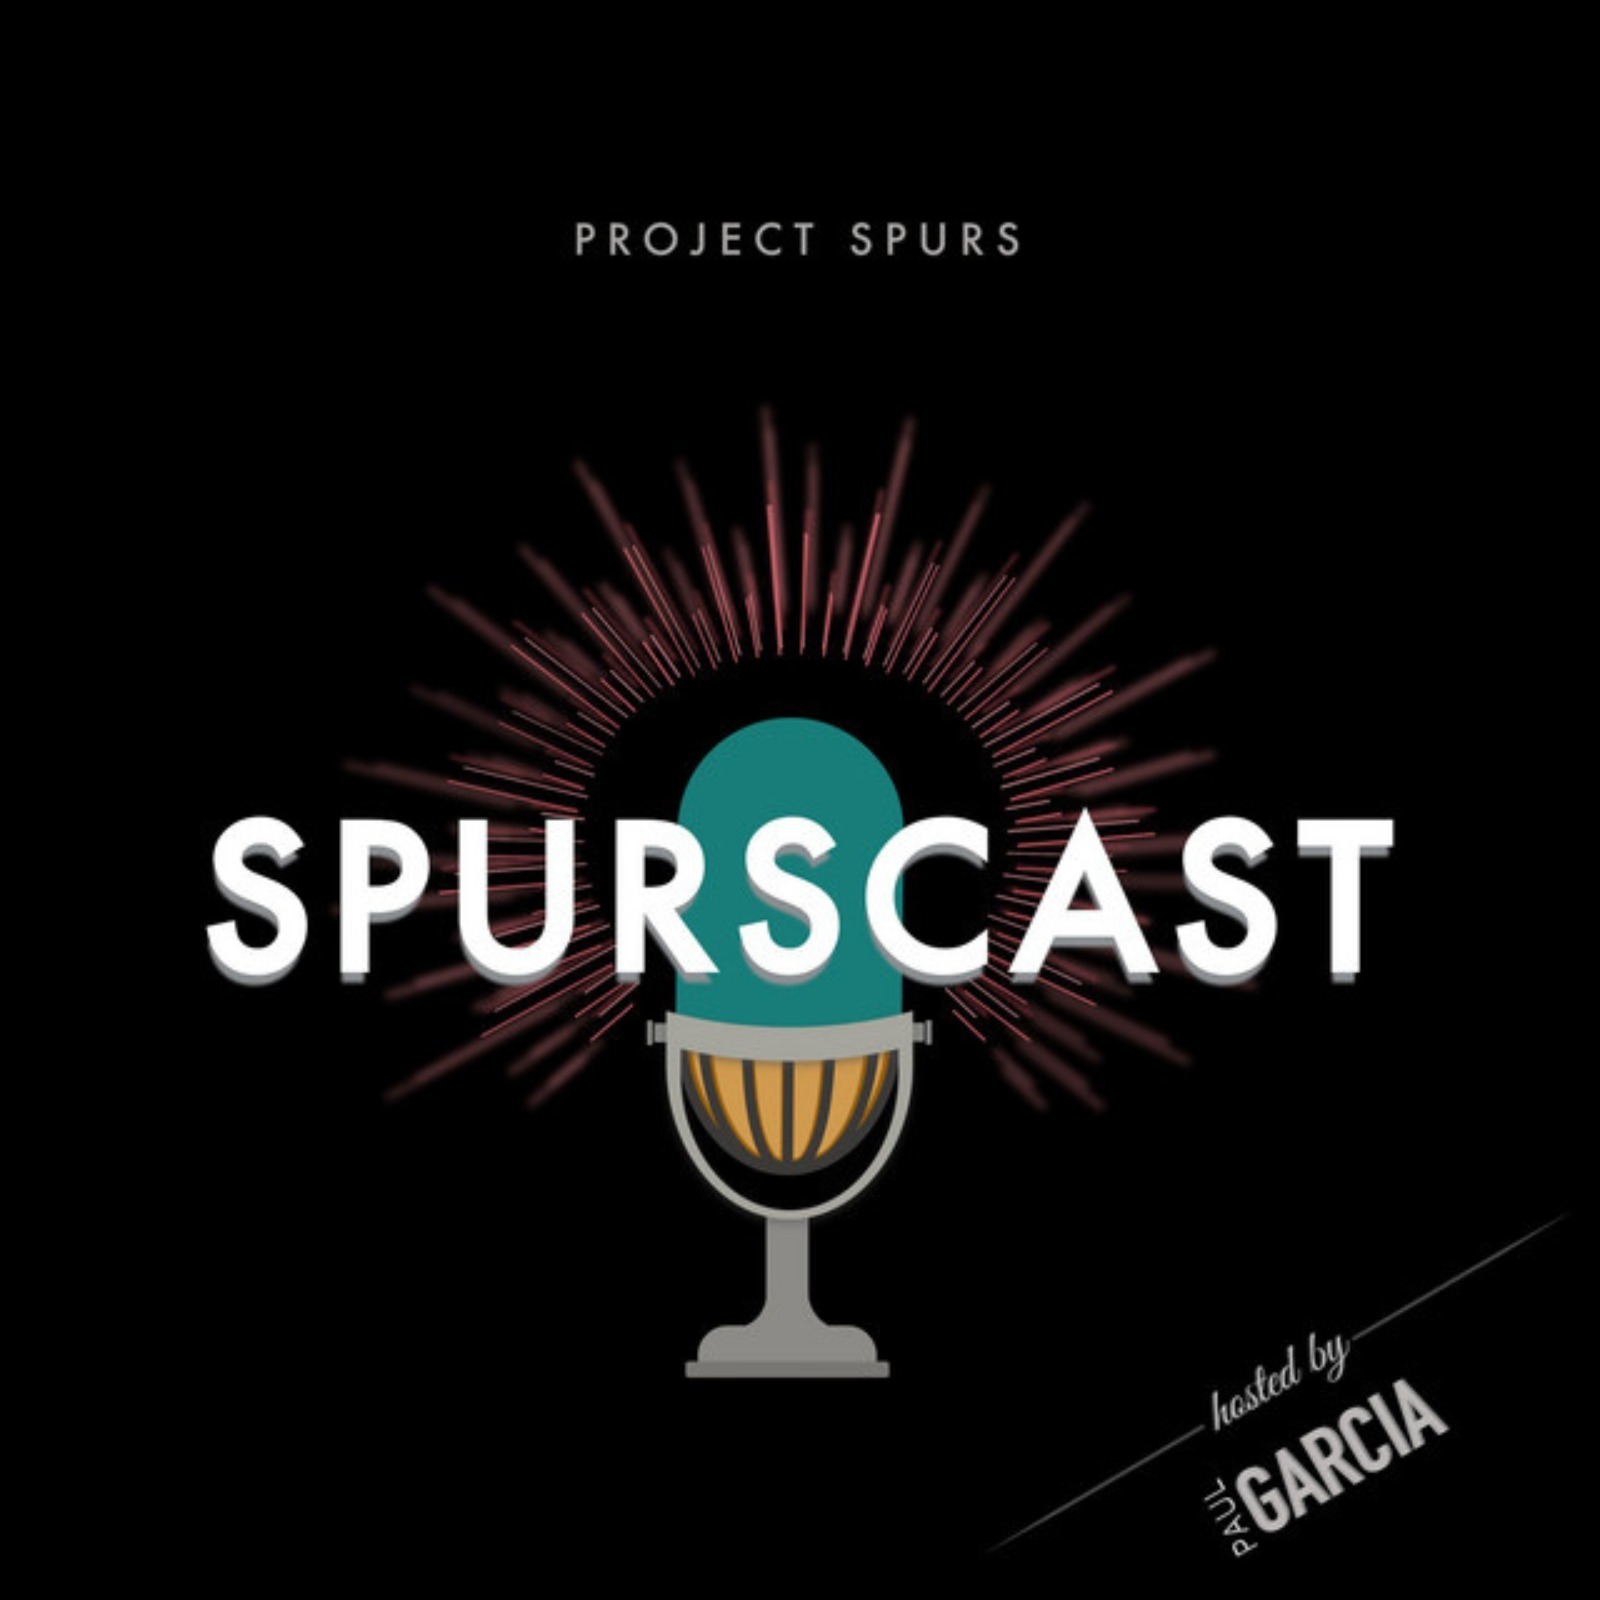 Spurscast Ep. 727: The Third Quarter Turnaround and More Trade Rumors